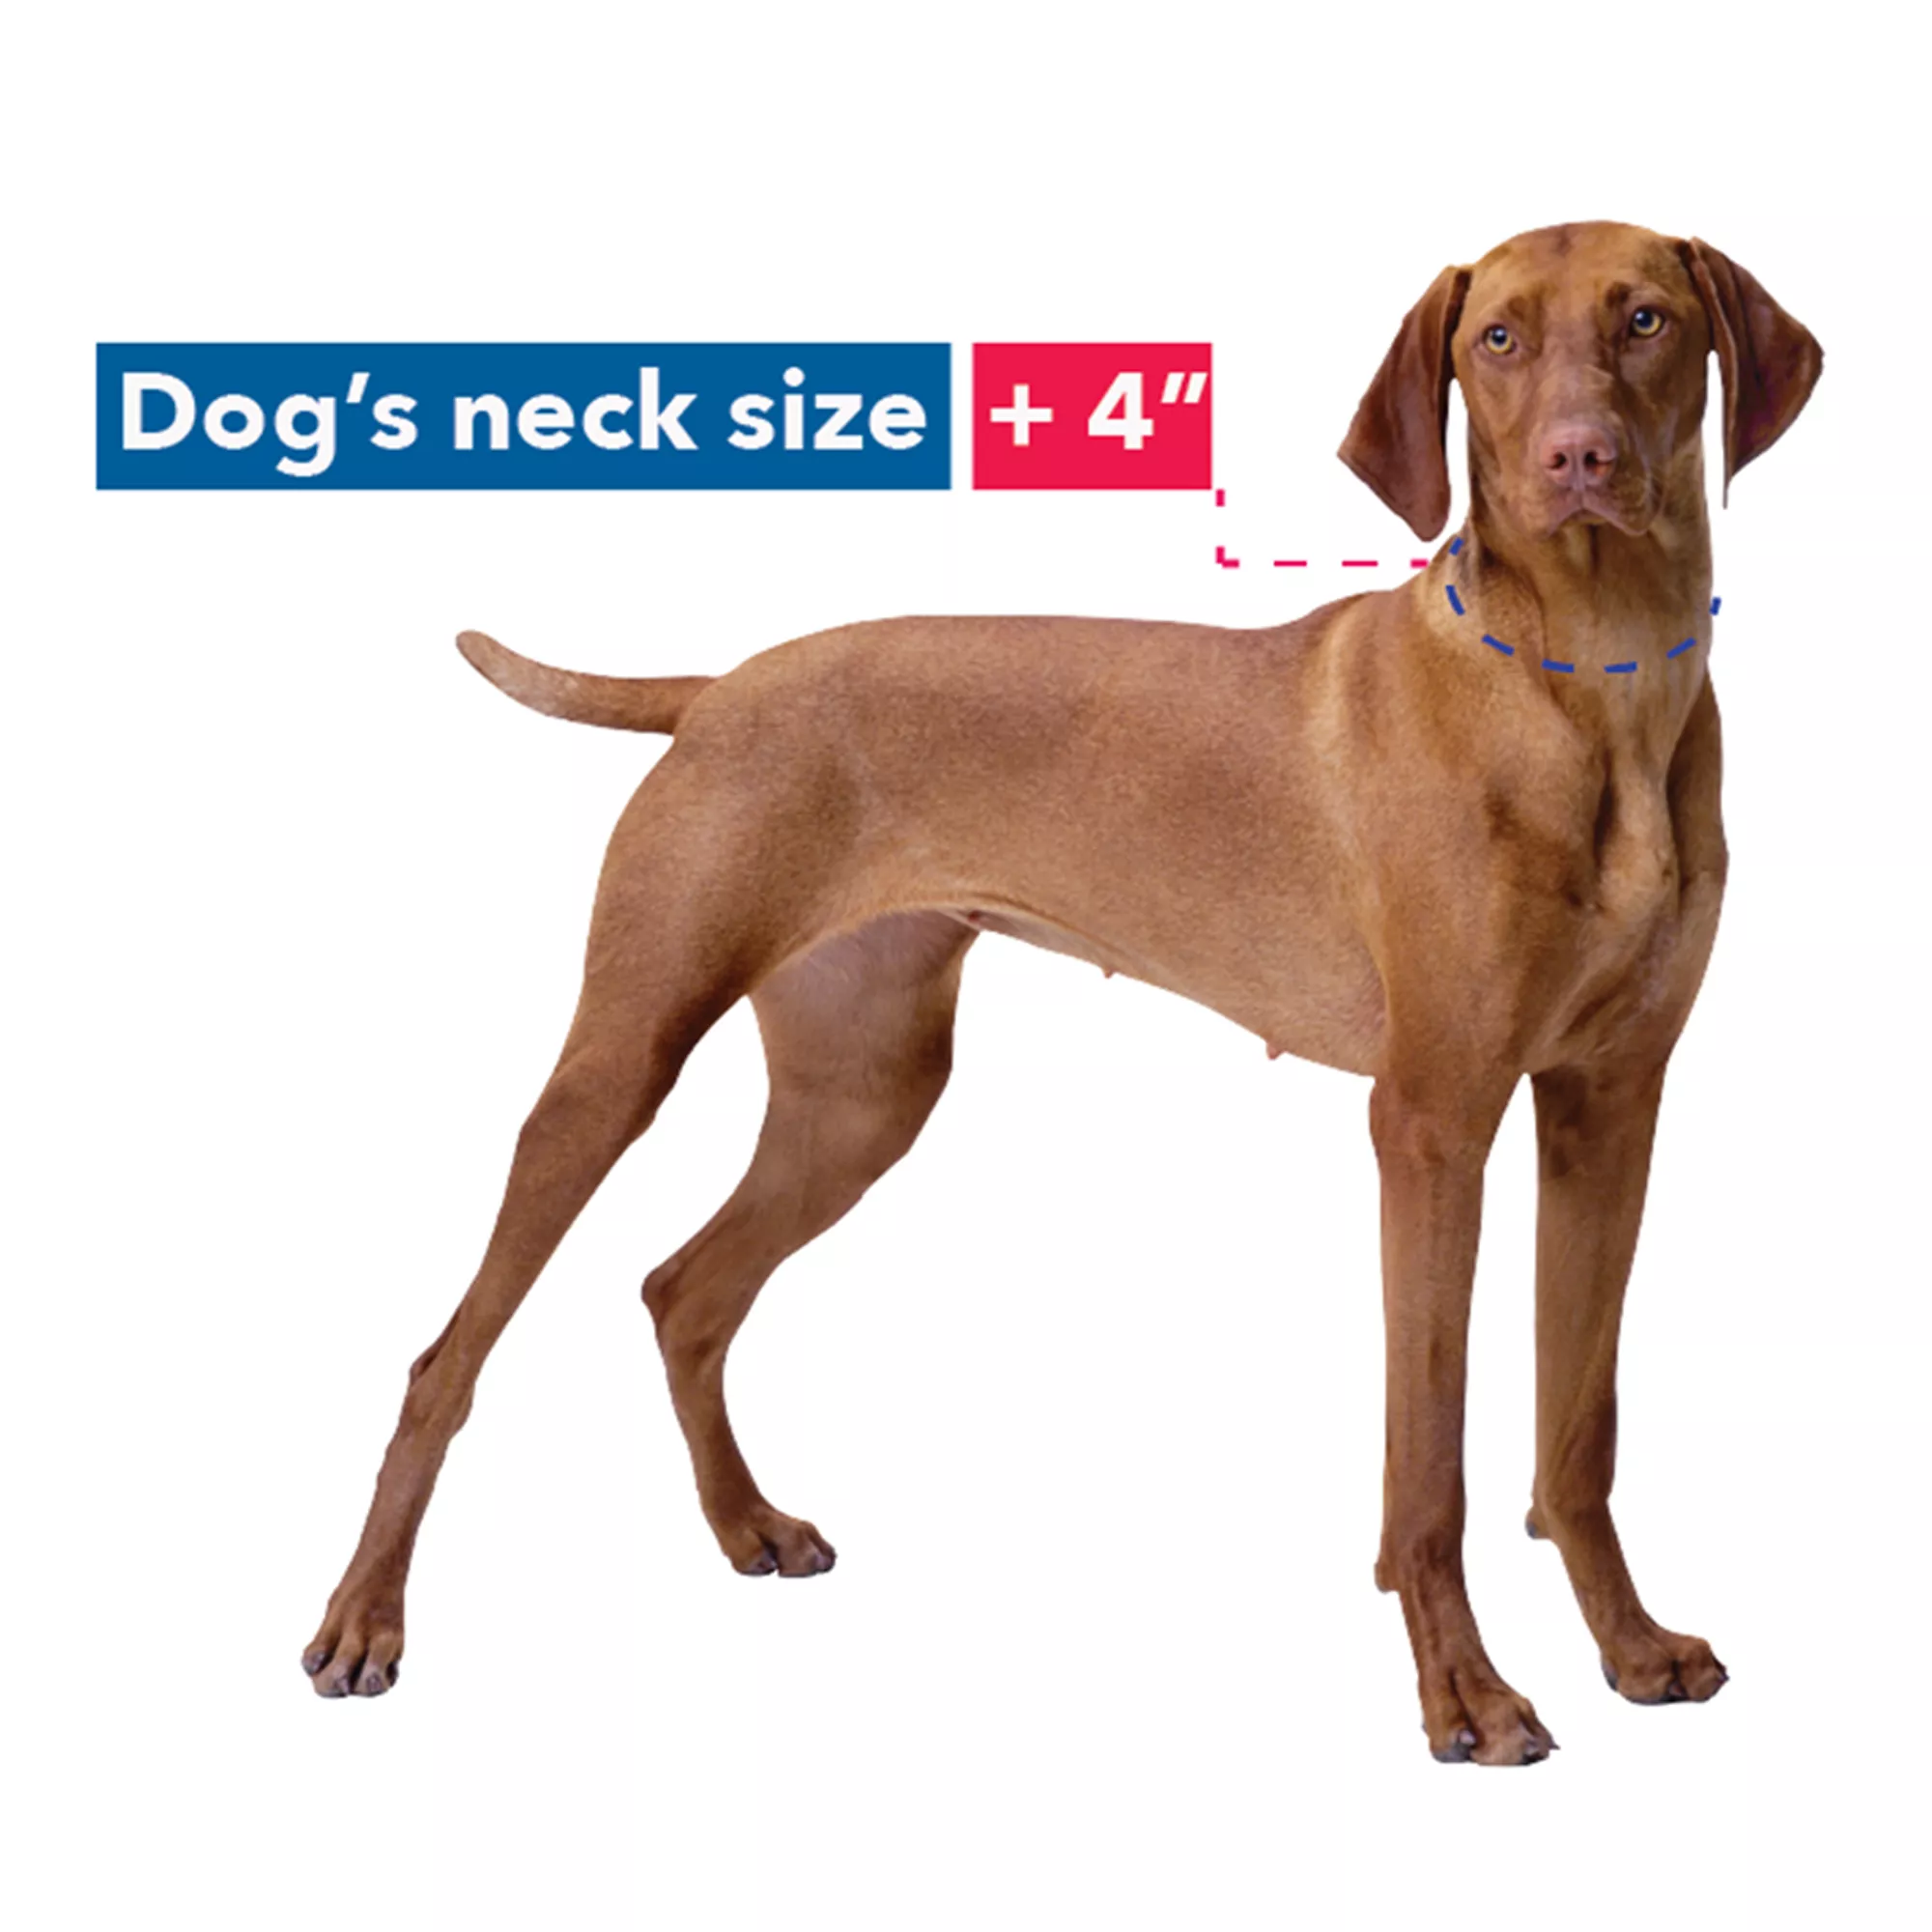 Where to measure a dog's neck for a chain collar